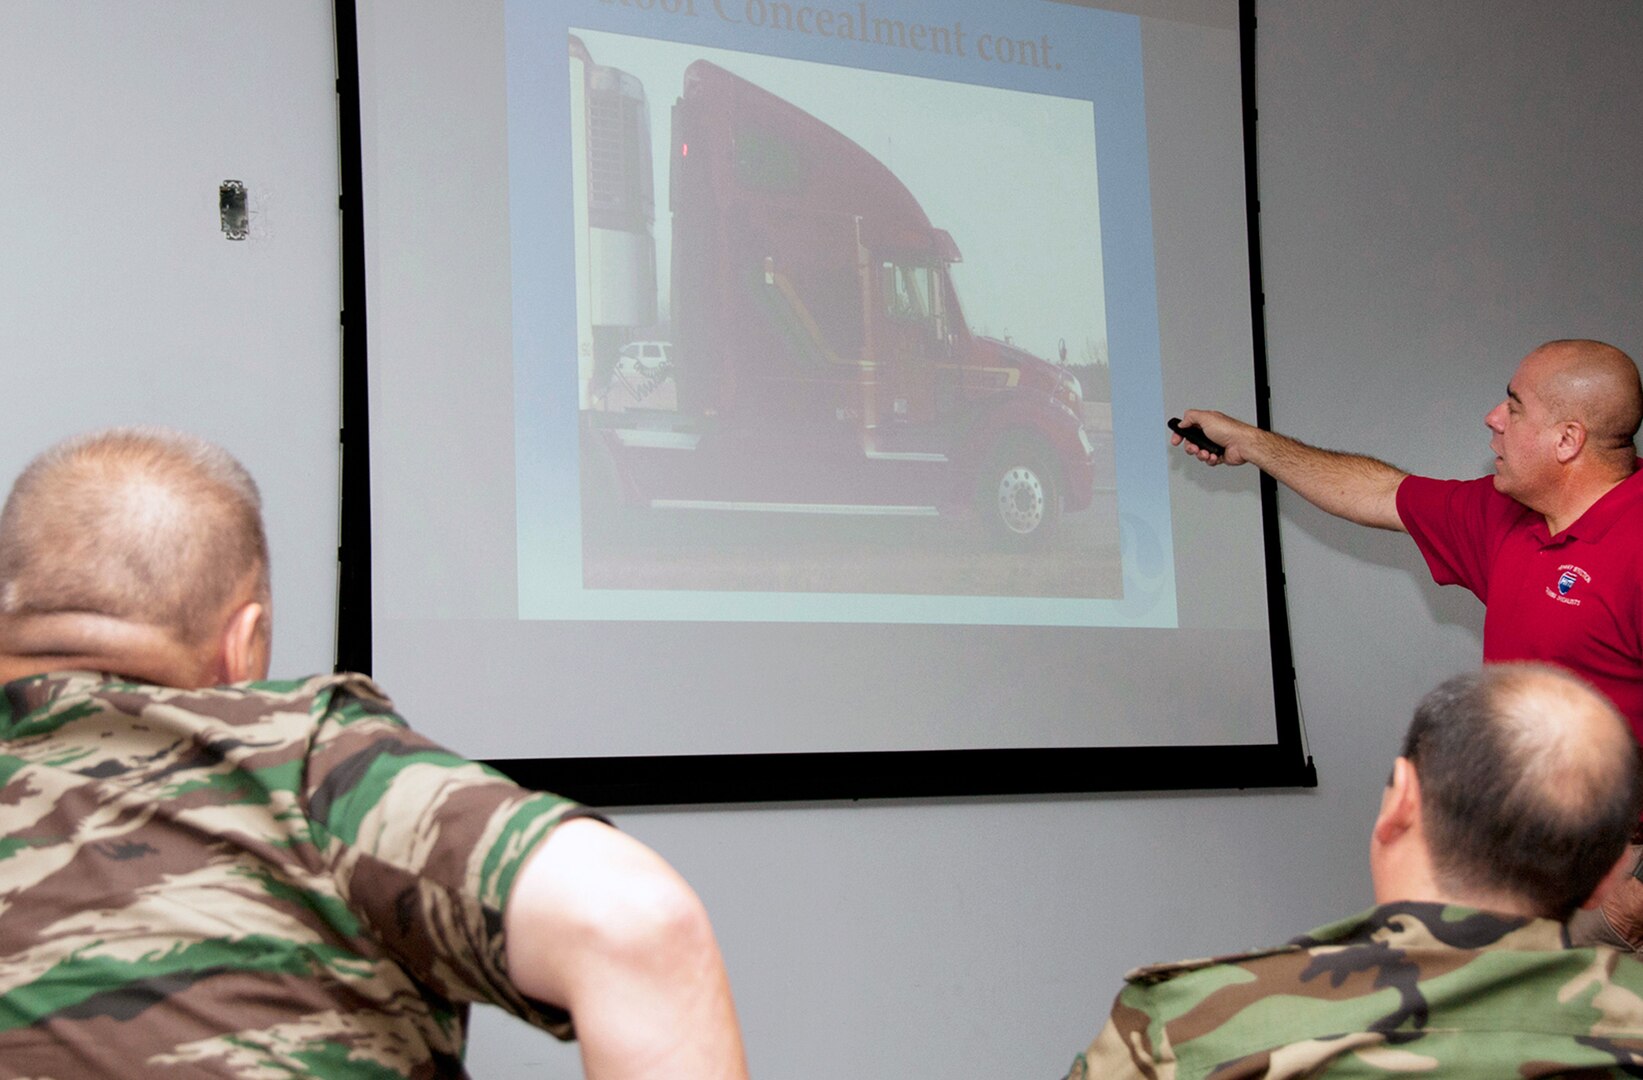 Kyrgyz Republic Drug Control Service and Border Service officers attend training at the Air National Guard Combat Readiness Training Center in Gulfport, Miss., Sept. 1-10, 2013. The Kyrgyz Republic personnel were in the United States for a counternarcotics information exchange with U.S. subject matter experts in counternarcotics and highway interdiction.